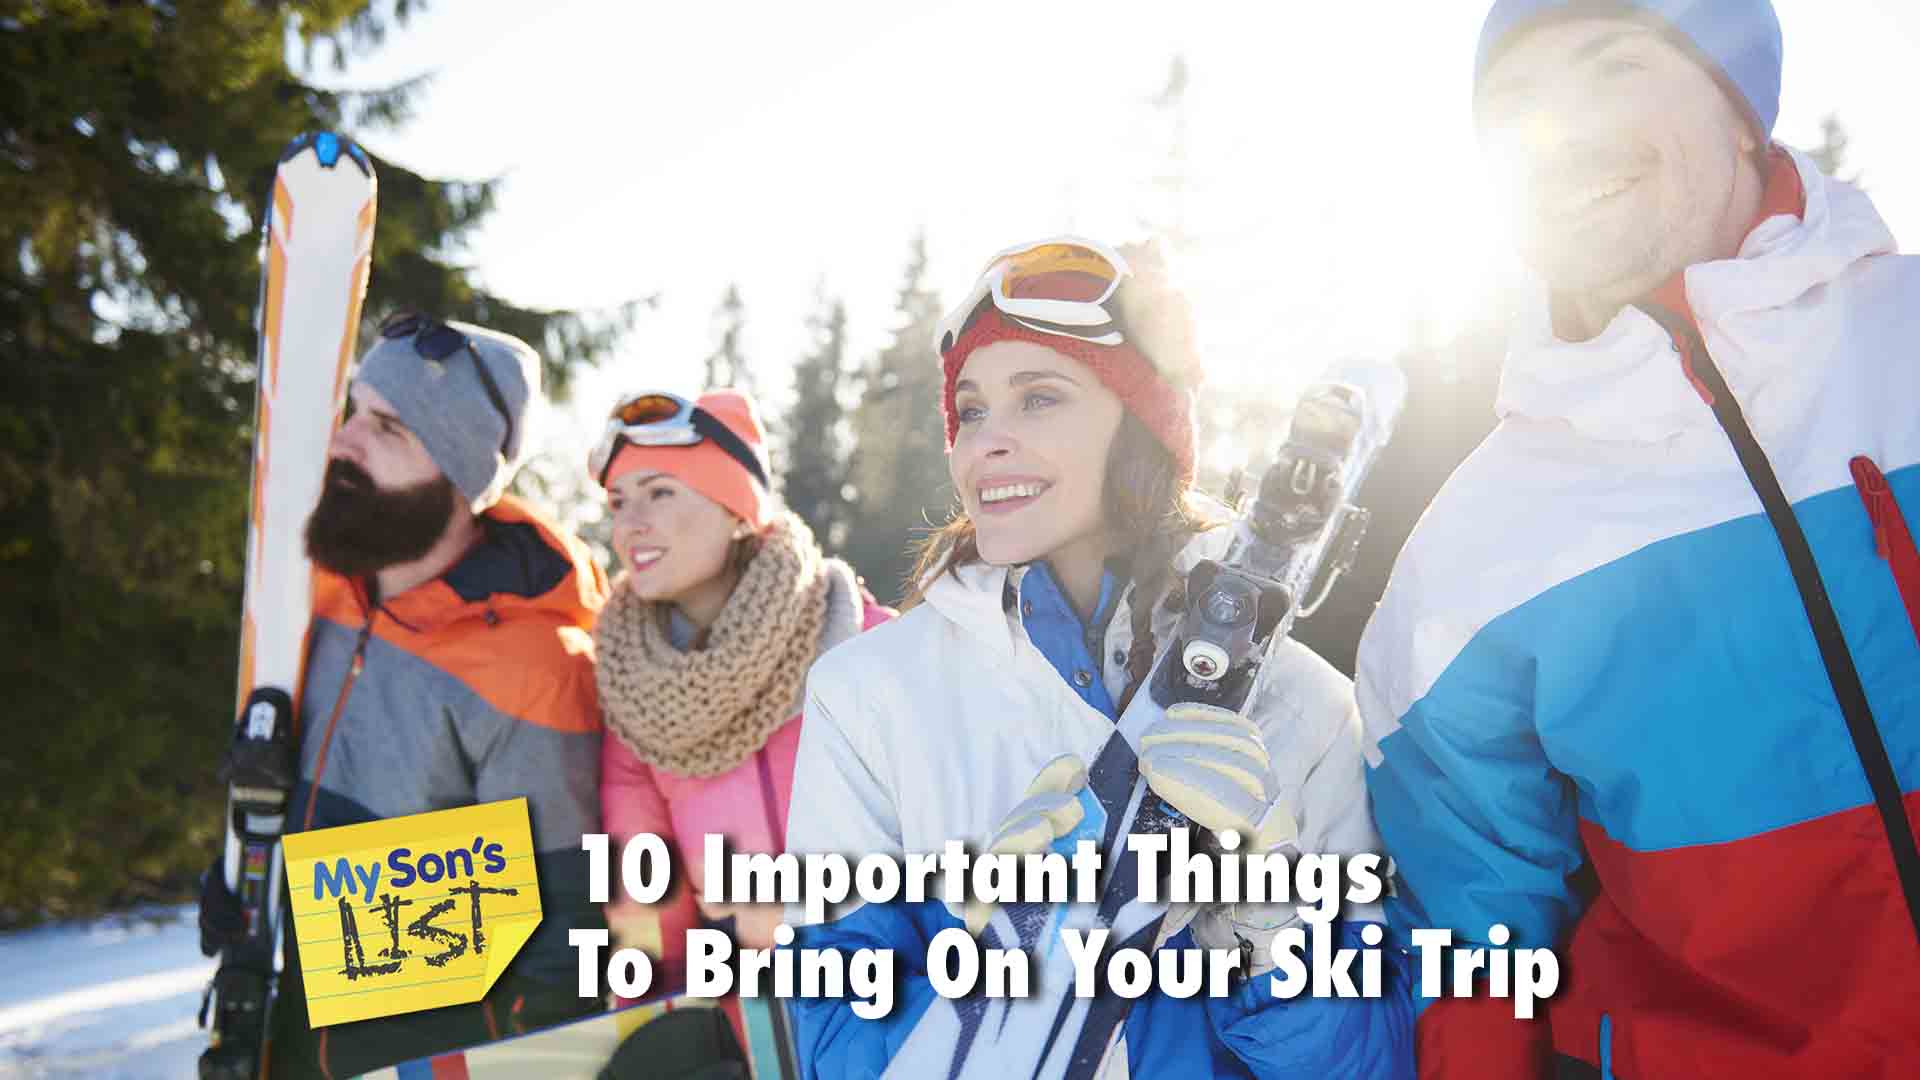 MY Sons List of 10 Important Things to Bring On Your Ski Trip